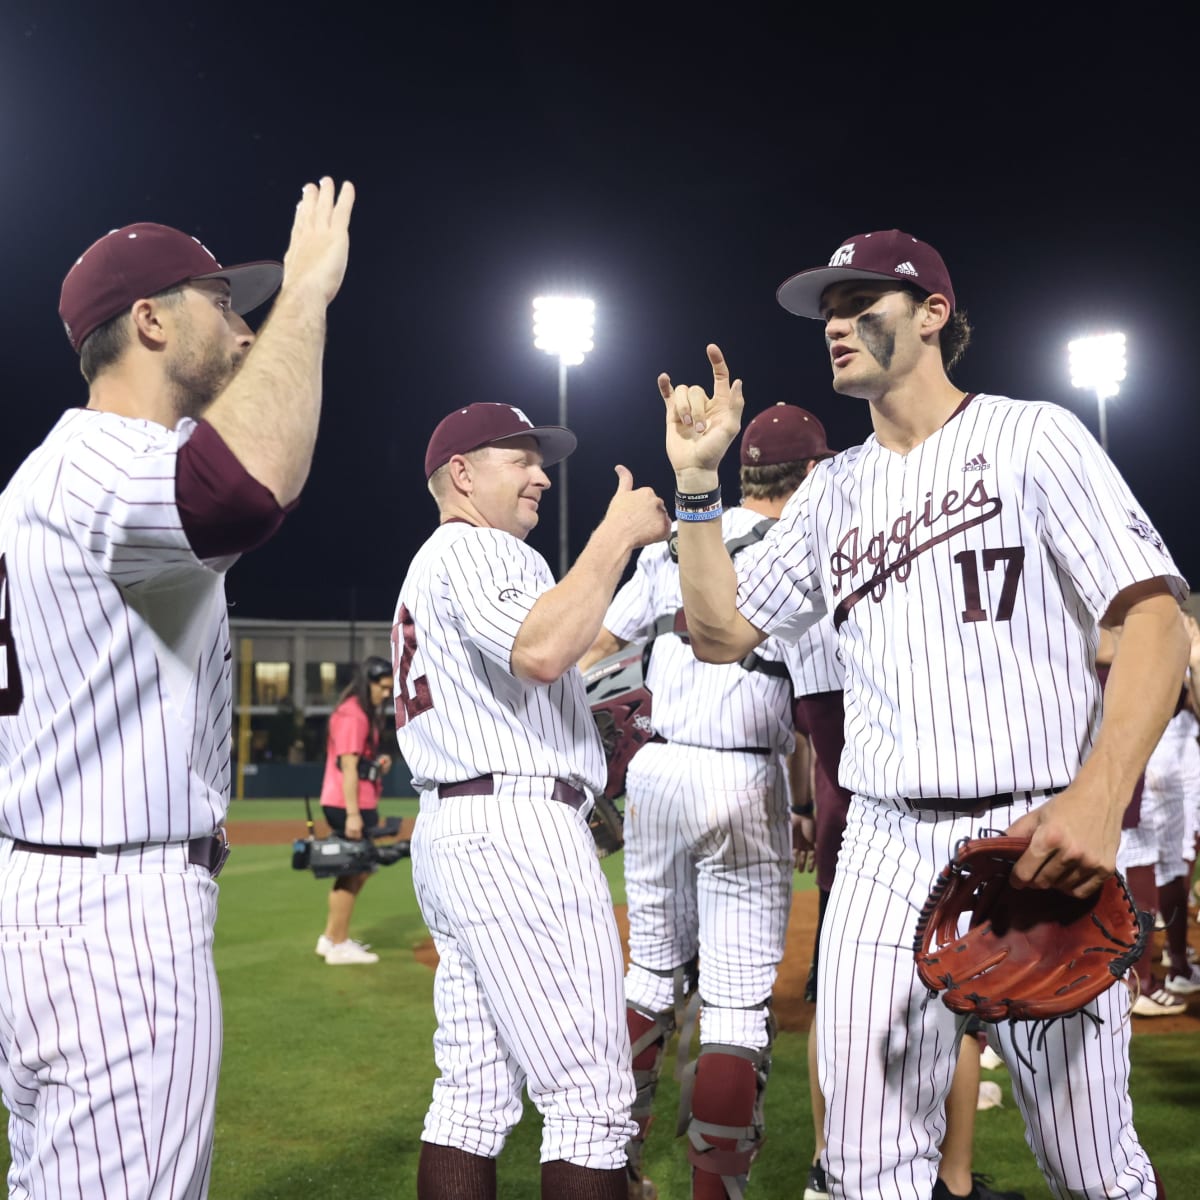 Aggie baseball bevels up their uniforms for the SEC Tournament